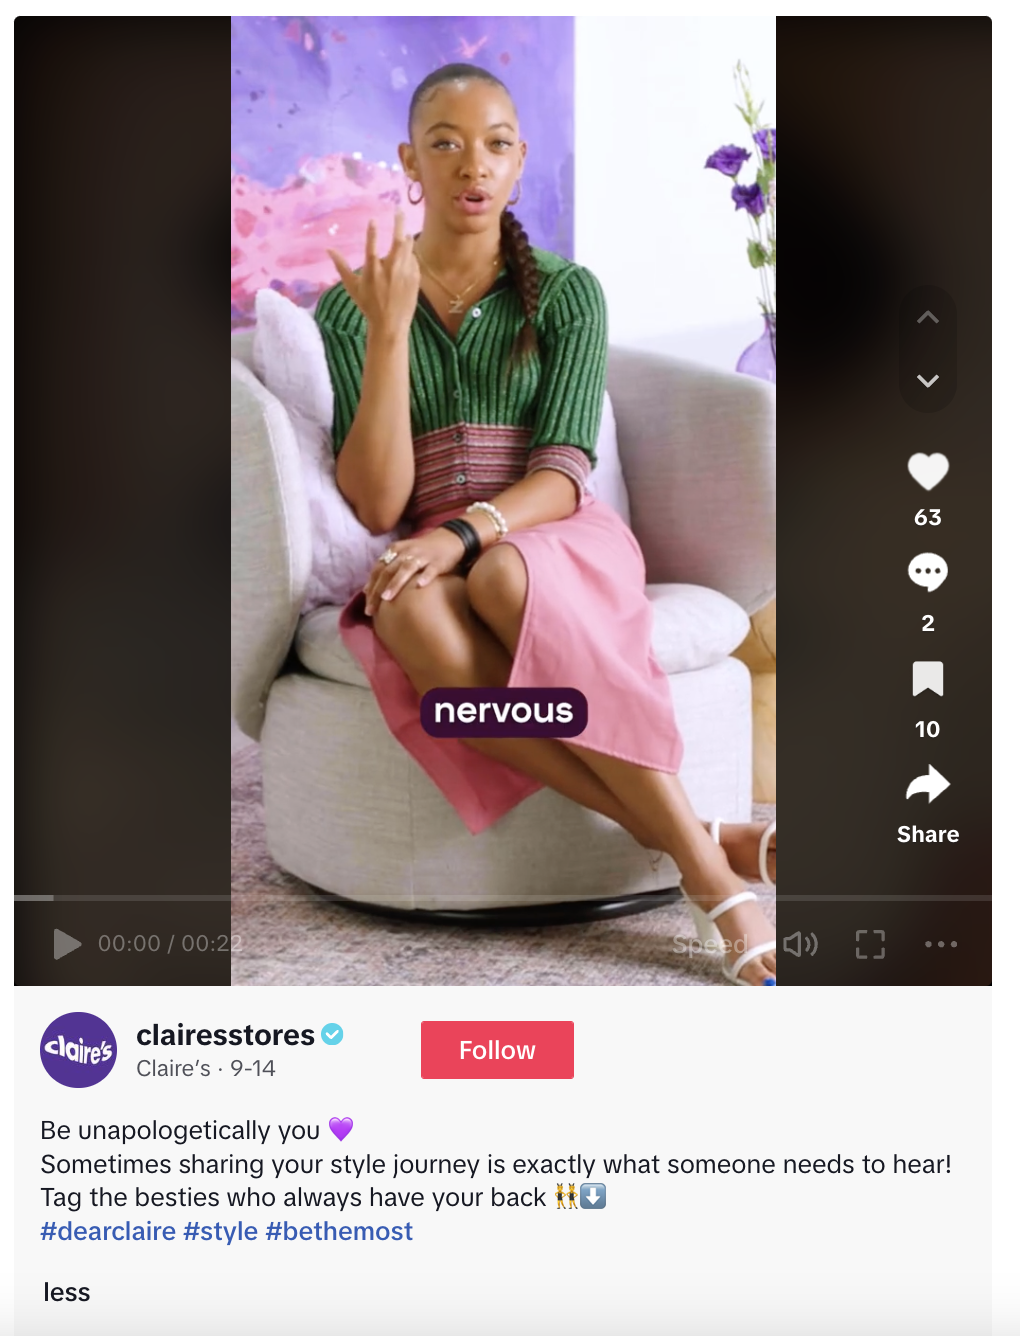 A TikTok video featuring a clip from Claire's #DearClaire docuseries. The caption encourages viewers to tag their "besties" in the comment section. 